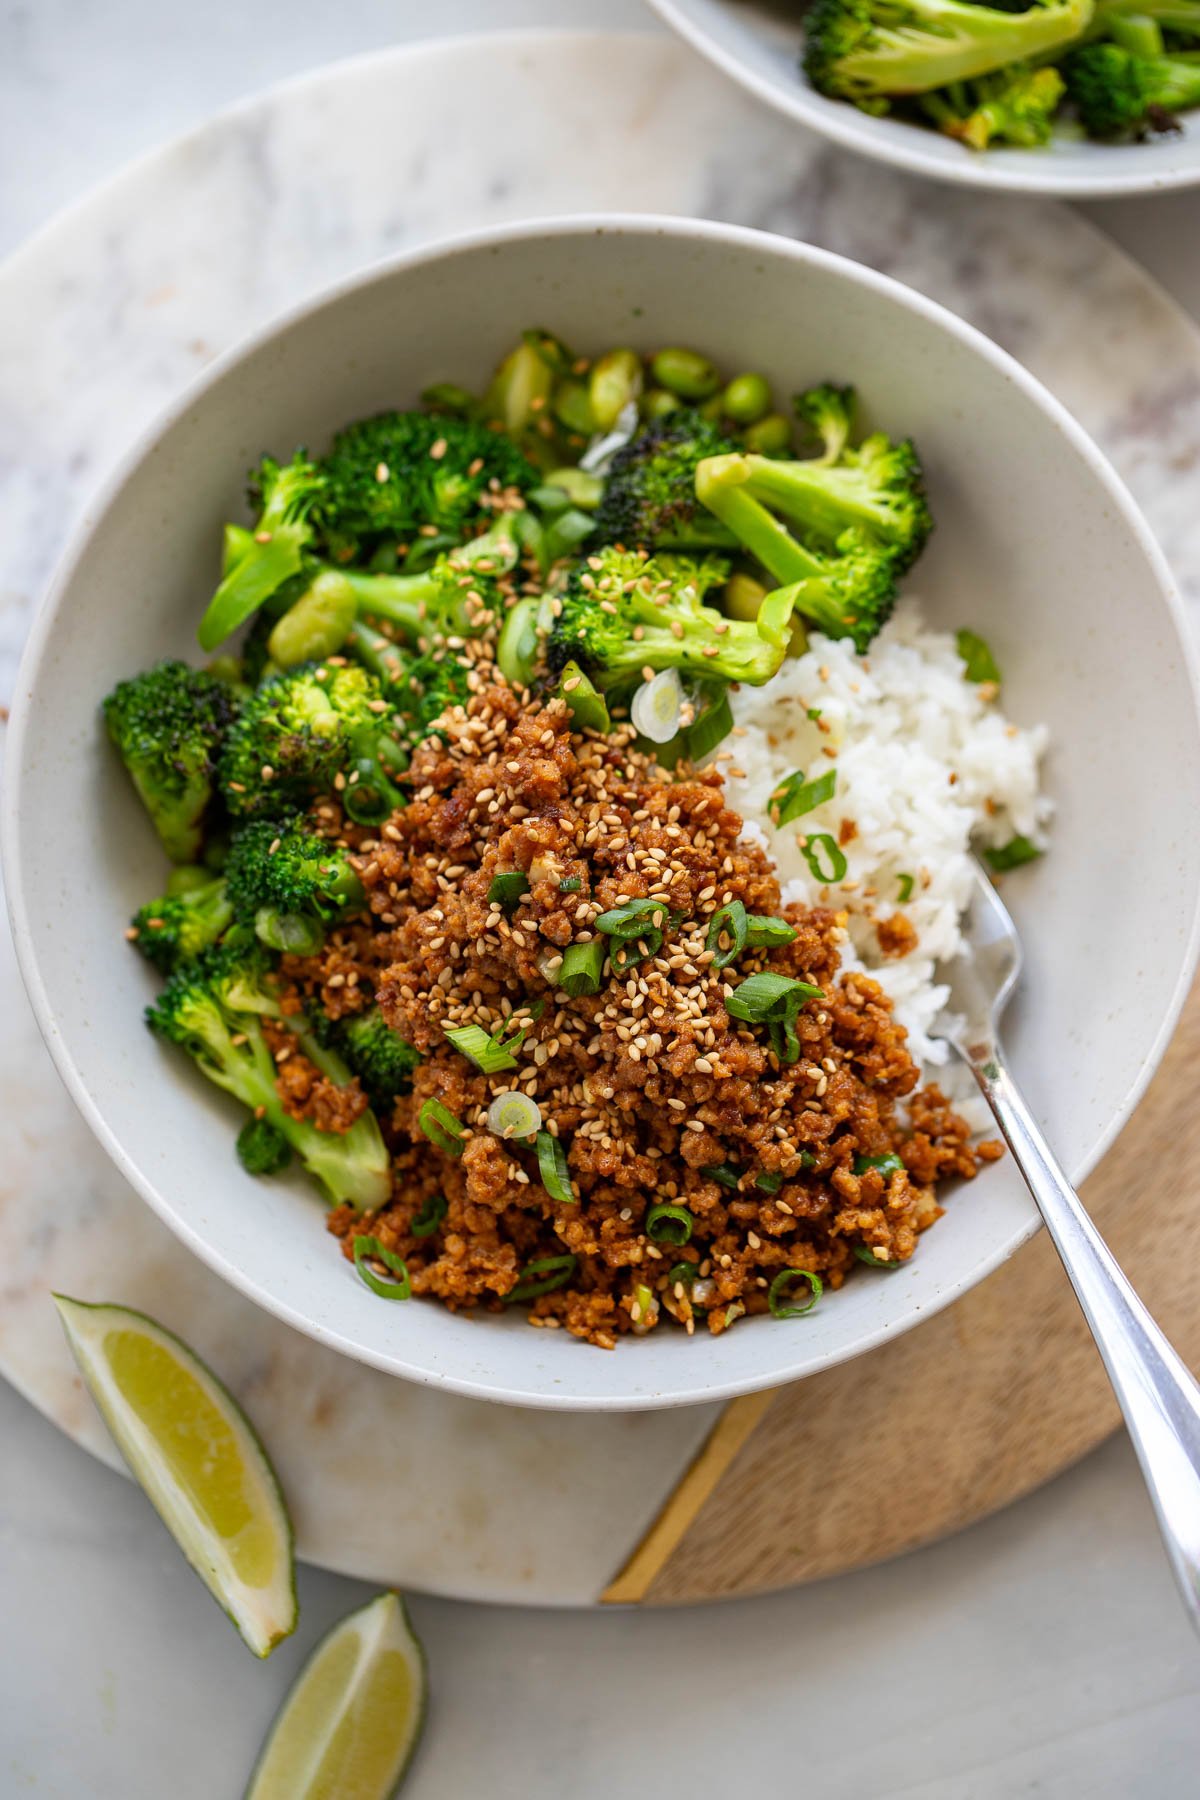 single serving of vegan beef and broccoli in a bowl garnished with sesame seeds.